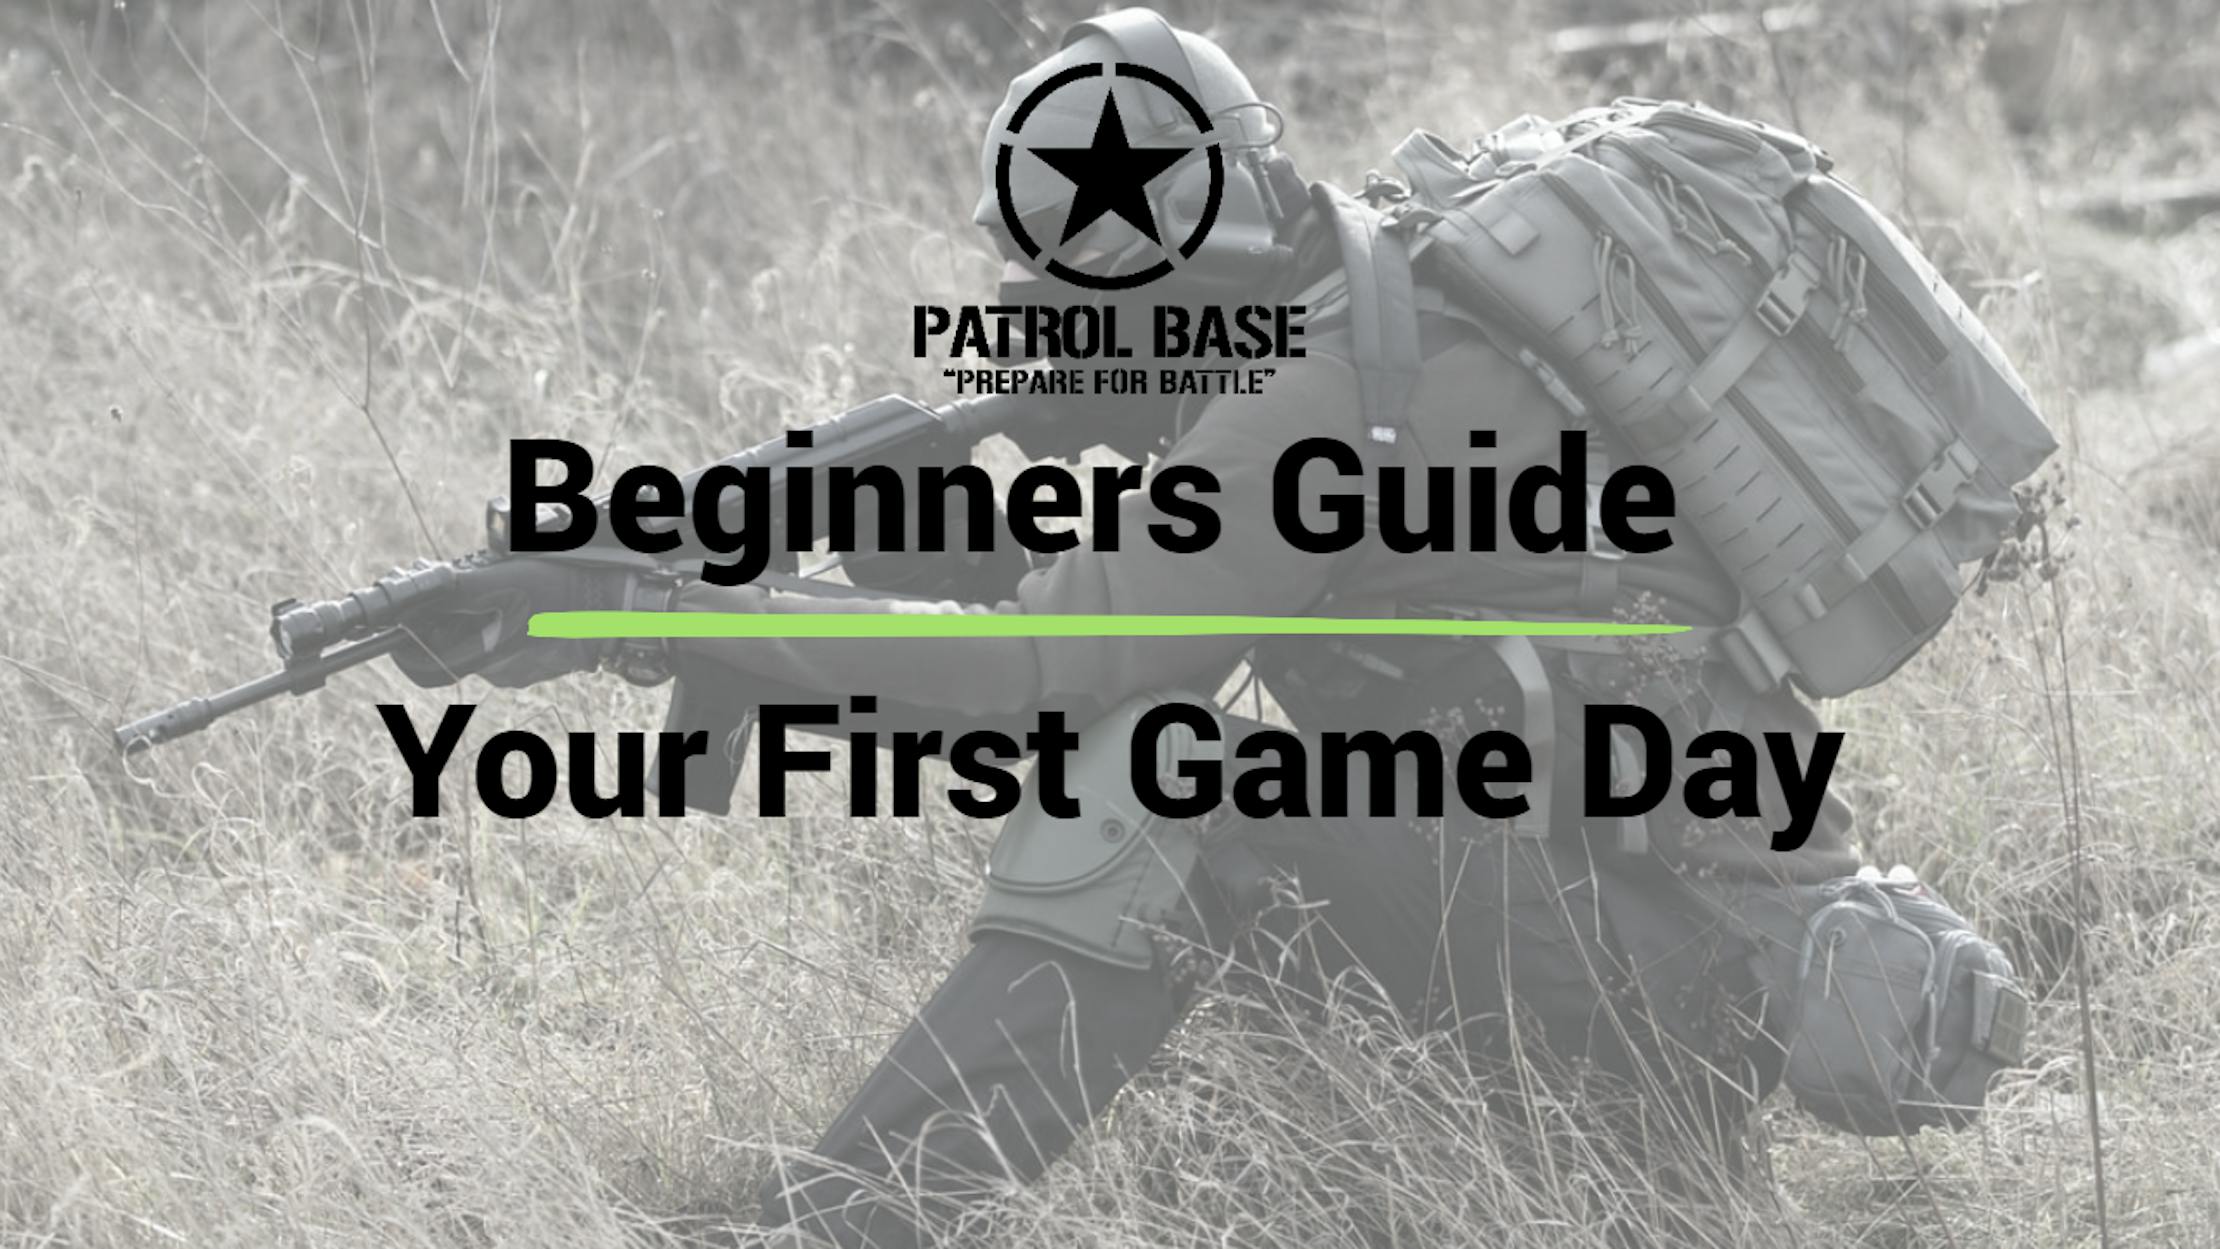 Beginners guide: Your First Skirmish - What to expect / what you will need